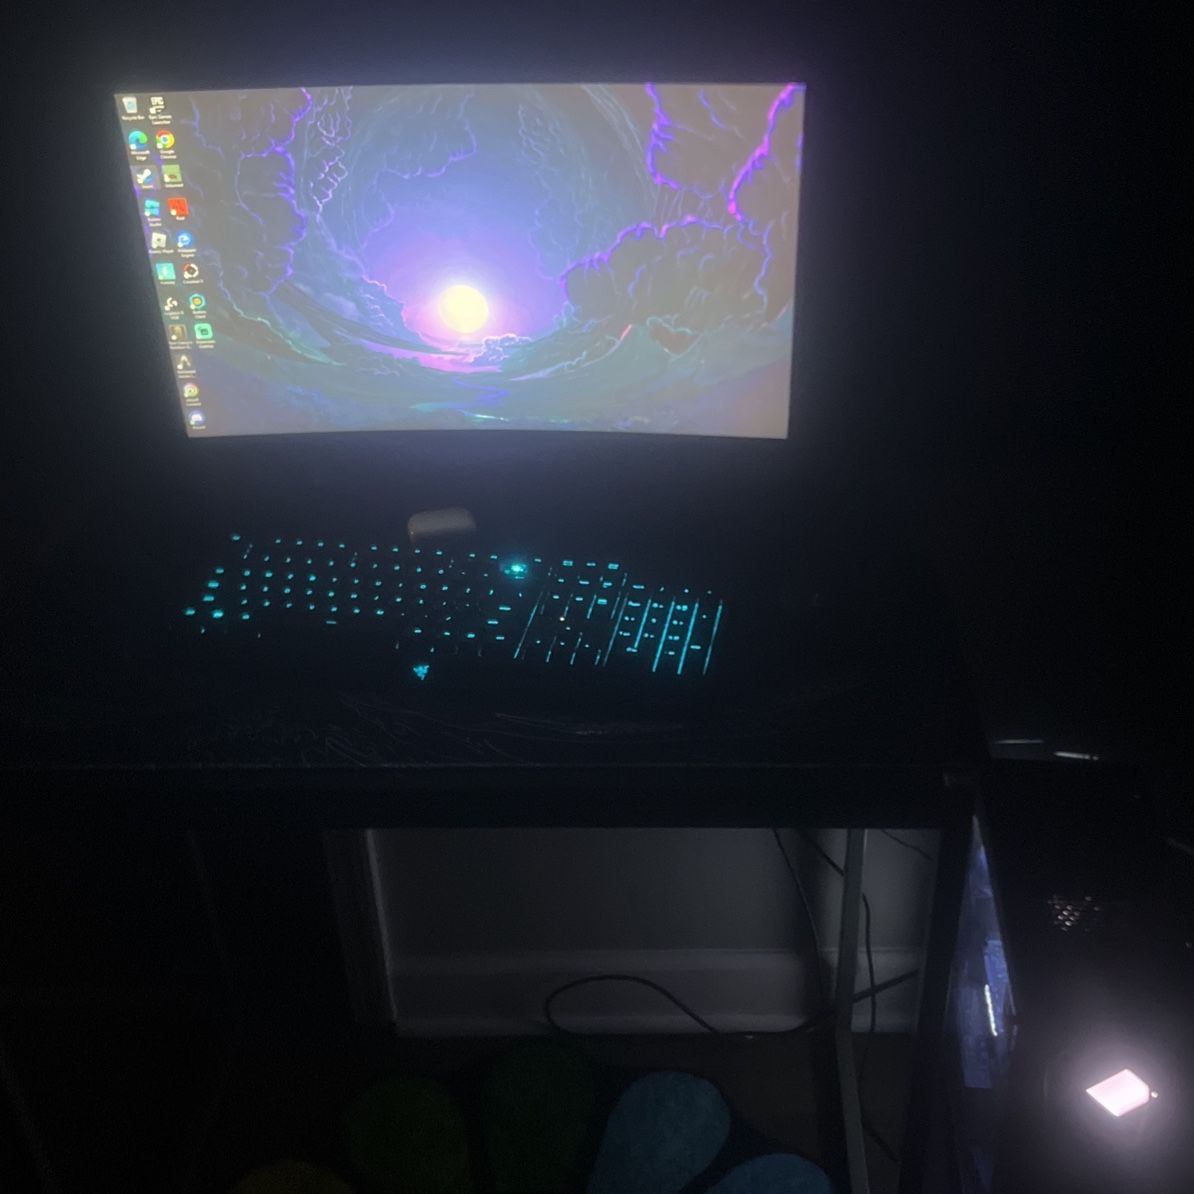 Omen 25L And Sceptre 24 Curved 75Hz Gaming Monitor Mouse And Keyboard